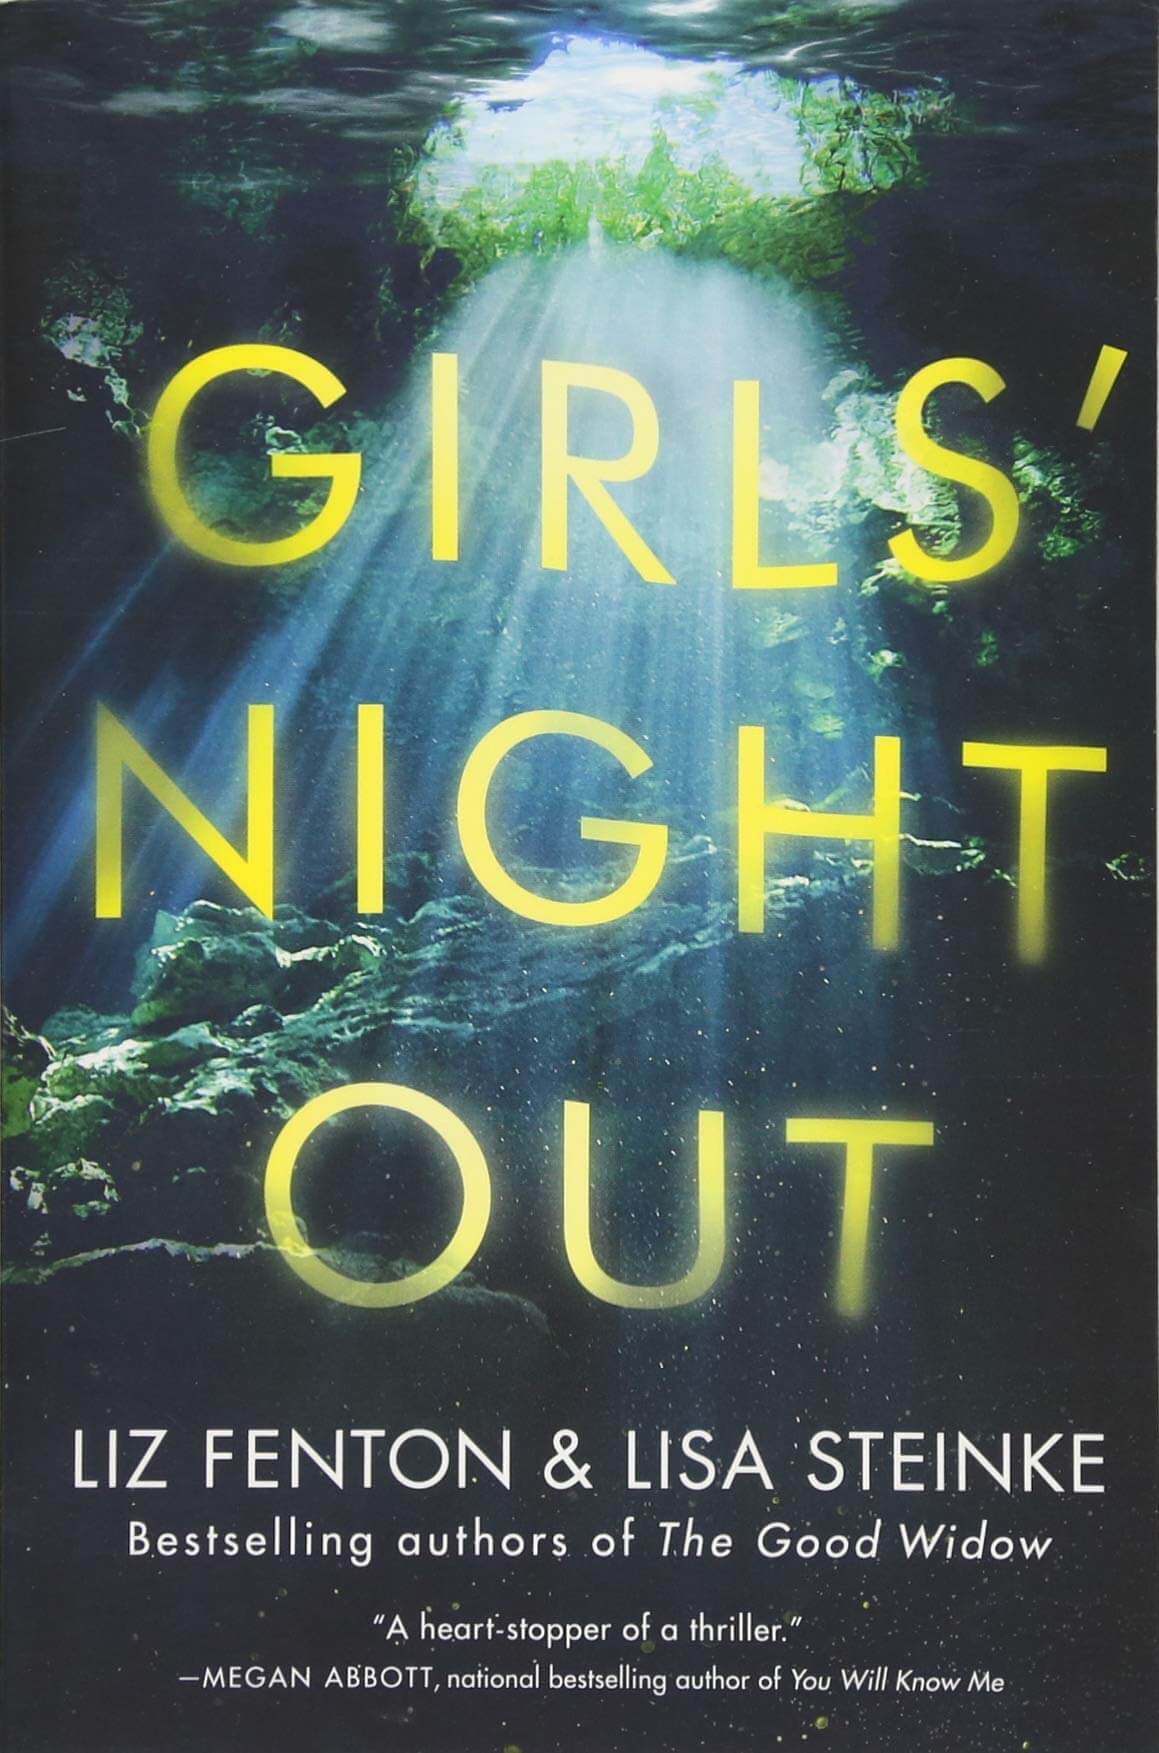 Cover of Girls' Night Out by Liz Fenton and Lisa Steinke